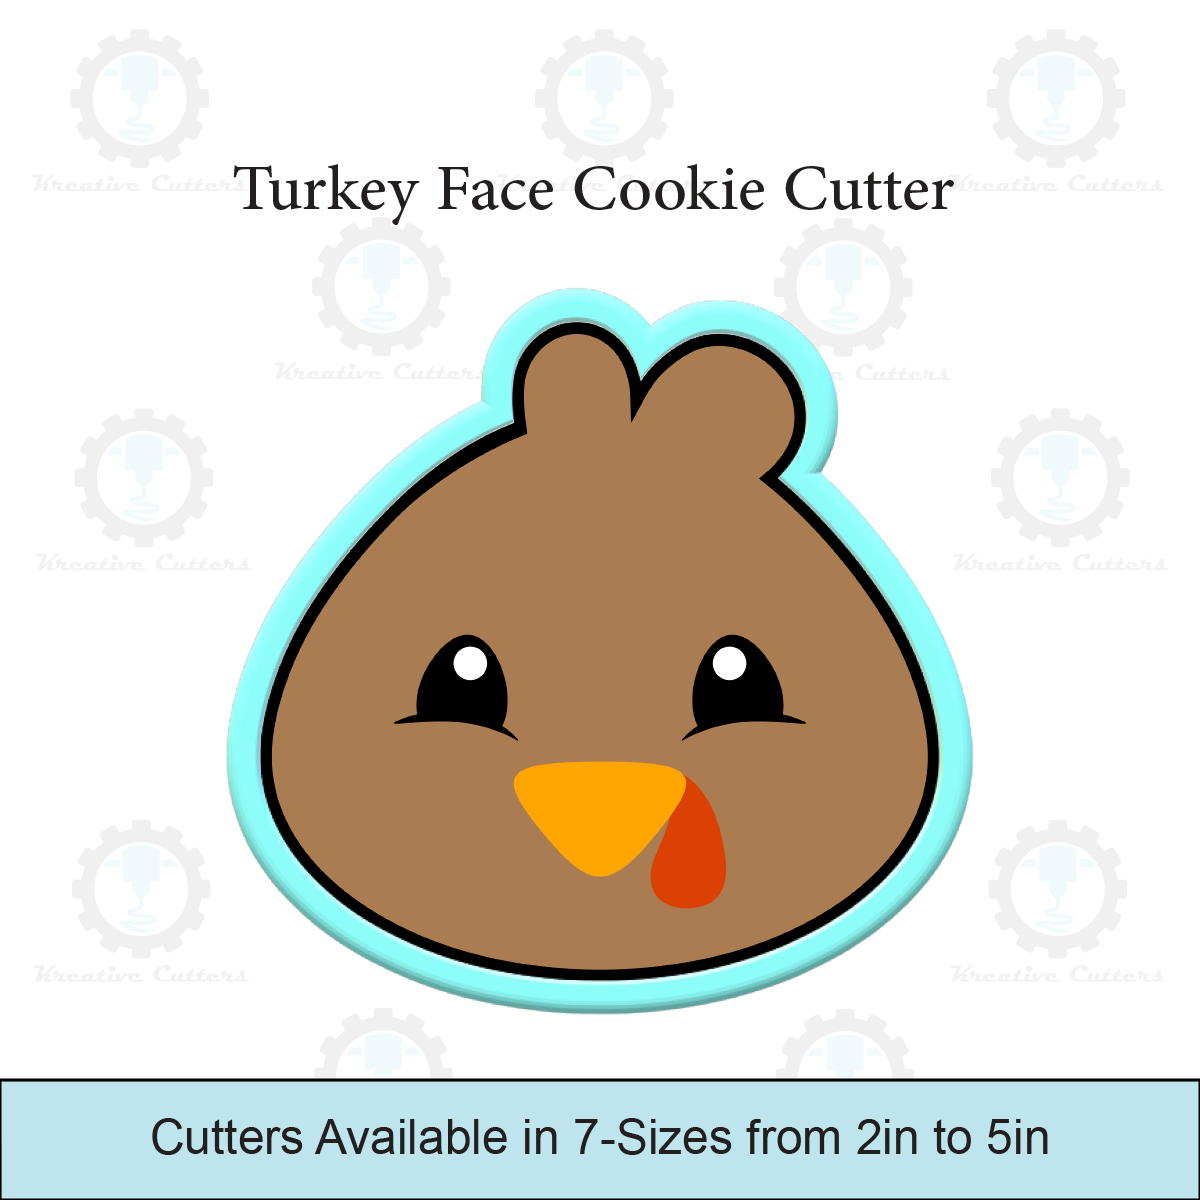 Turkey Face Cookie Cutters